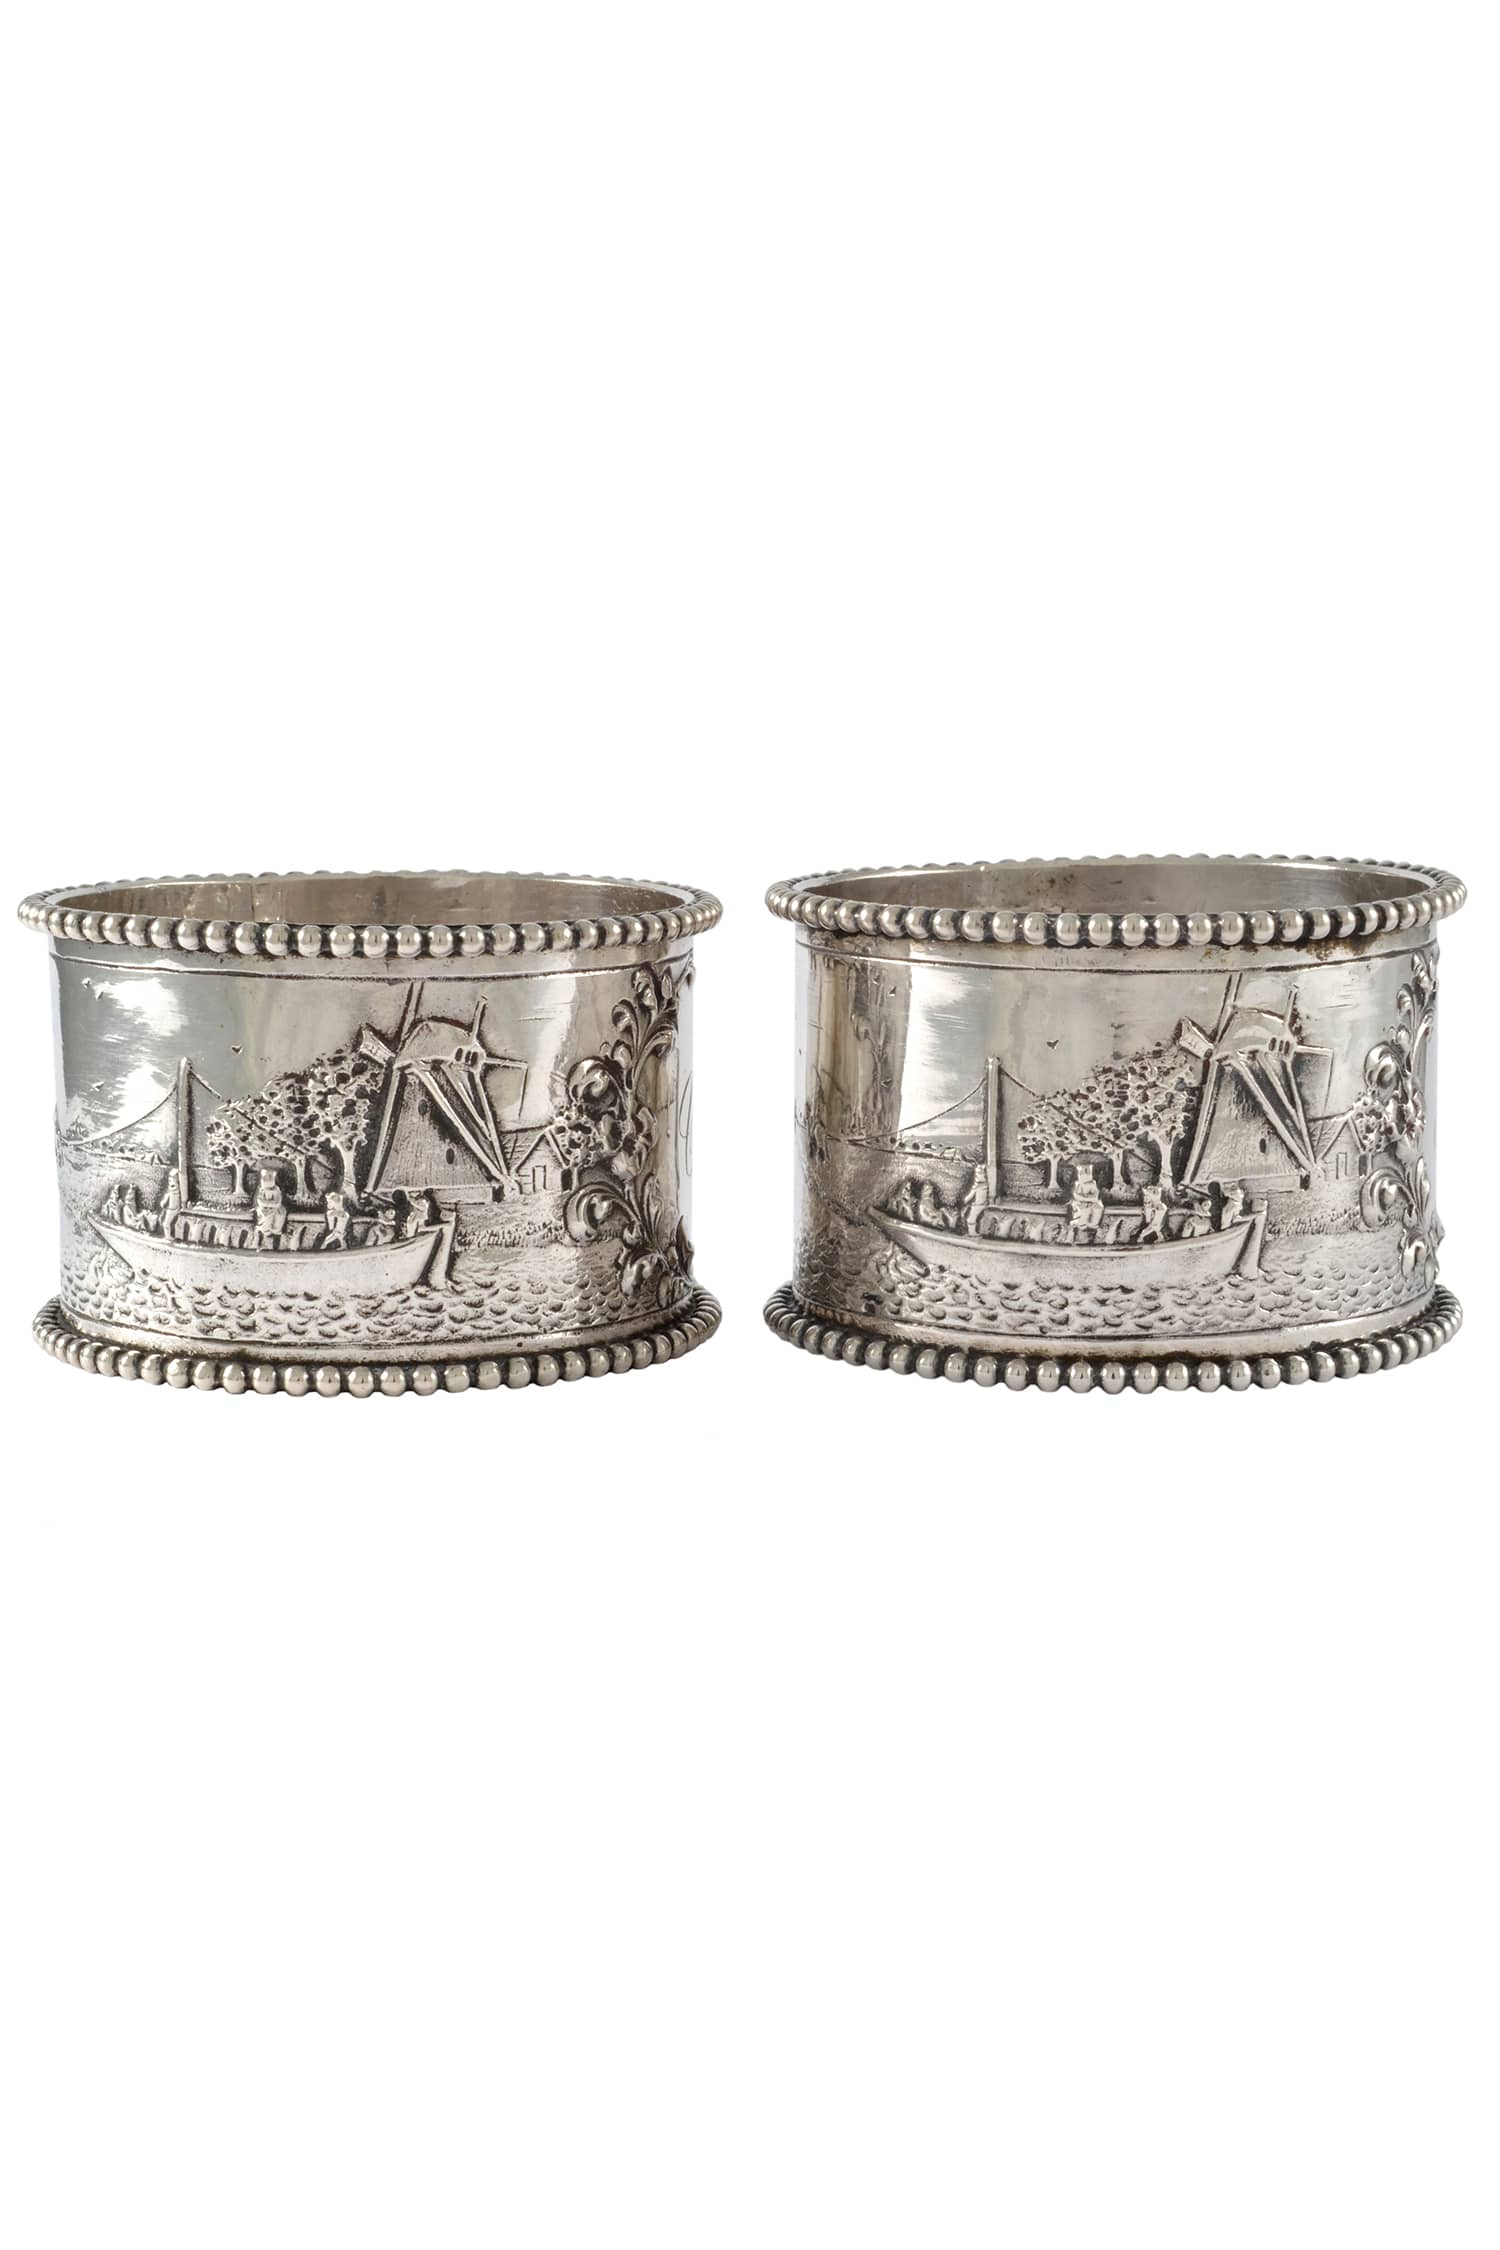 Ornate Antique French Sterling Silver Napkin Ring, Floral, RD